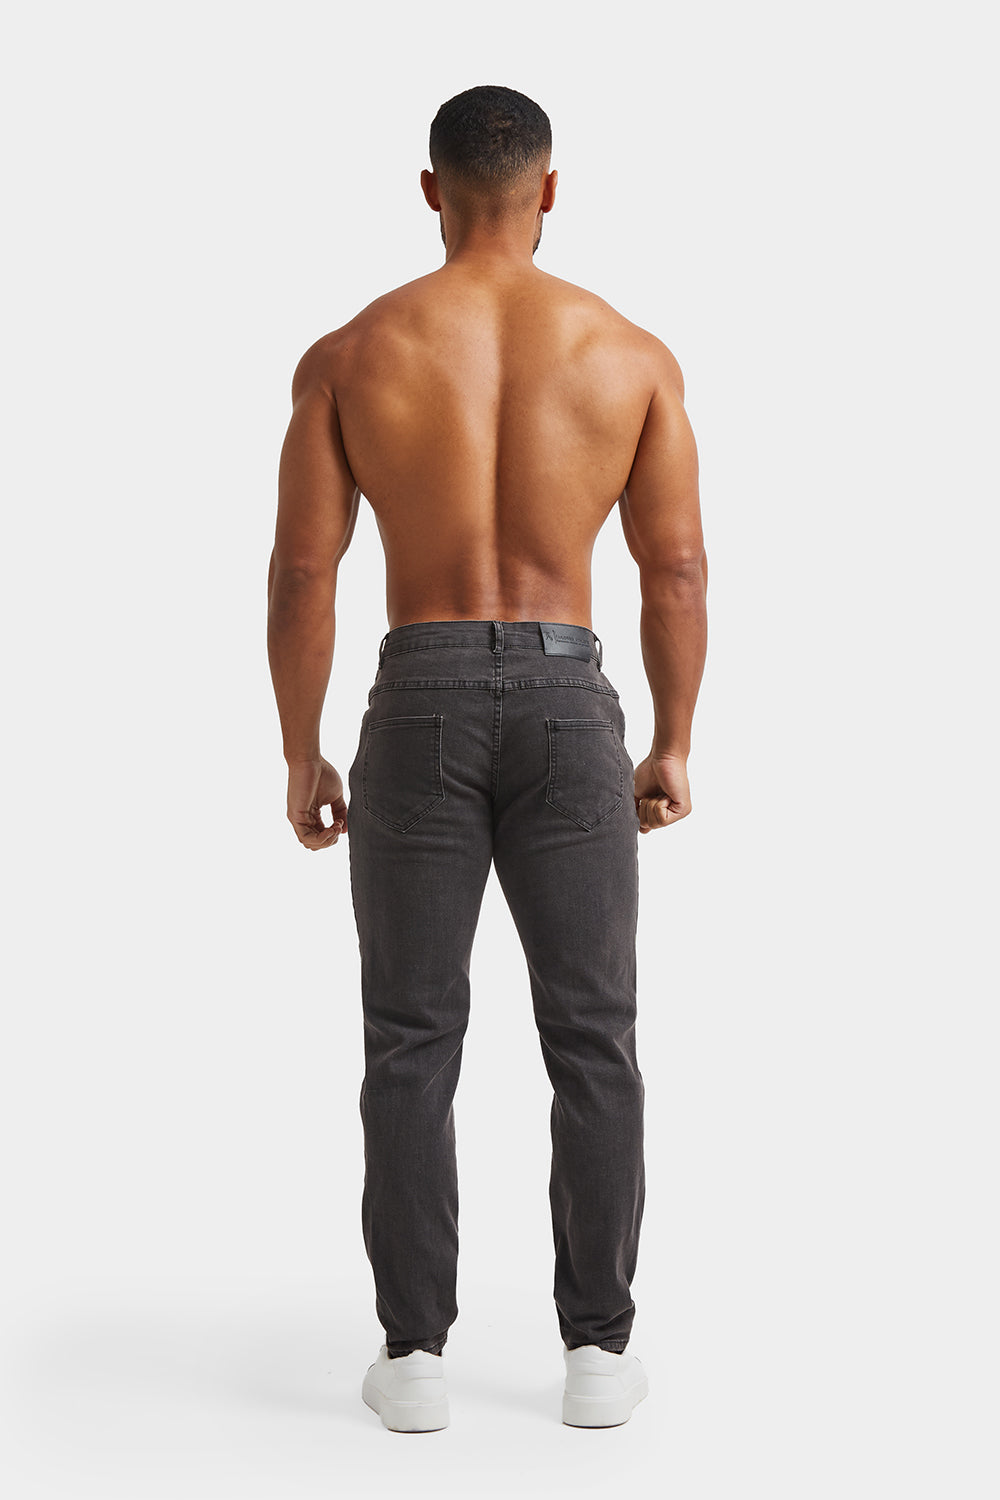 Athletic Fit Jeans in TAILORED Grey - USA Dark - ATHLETE